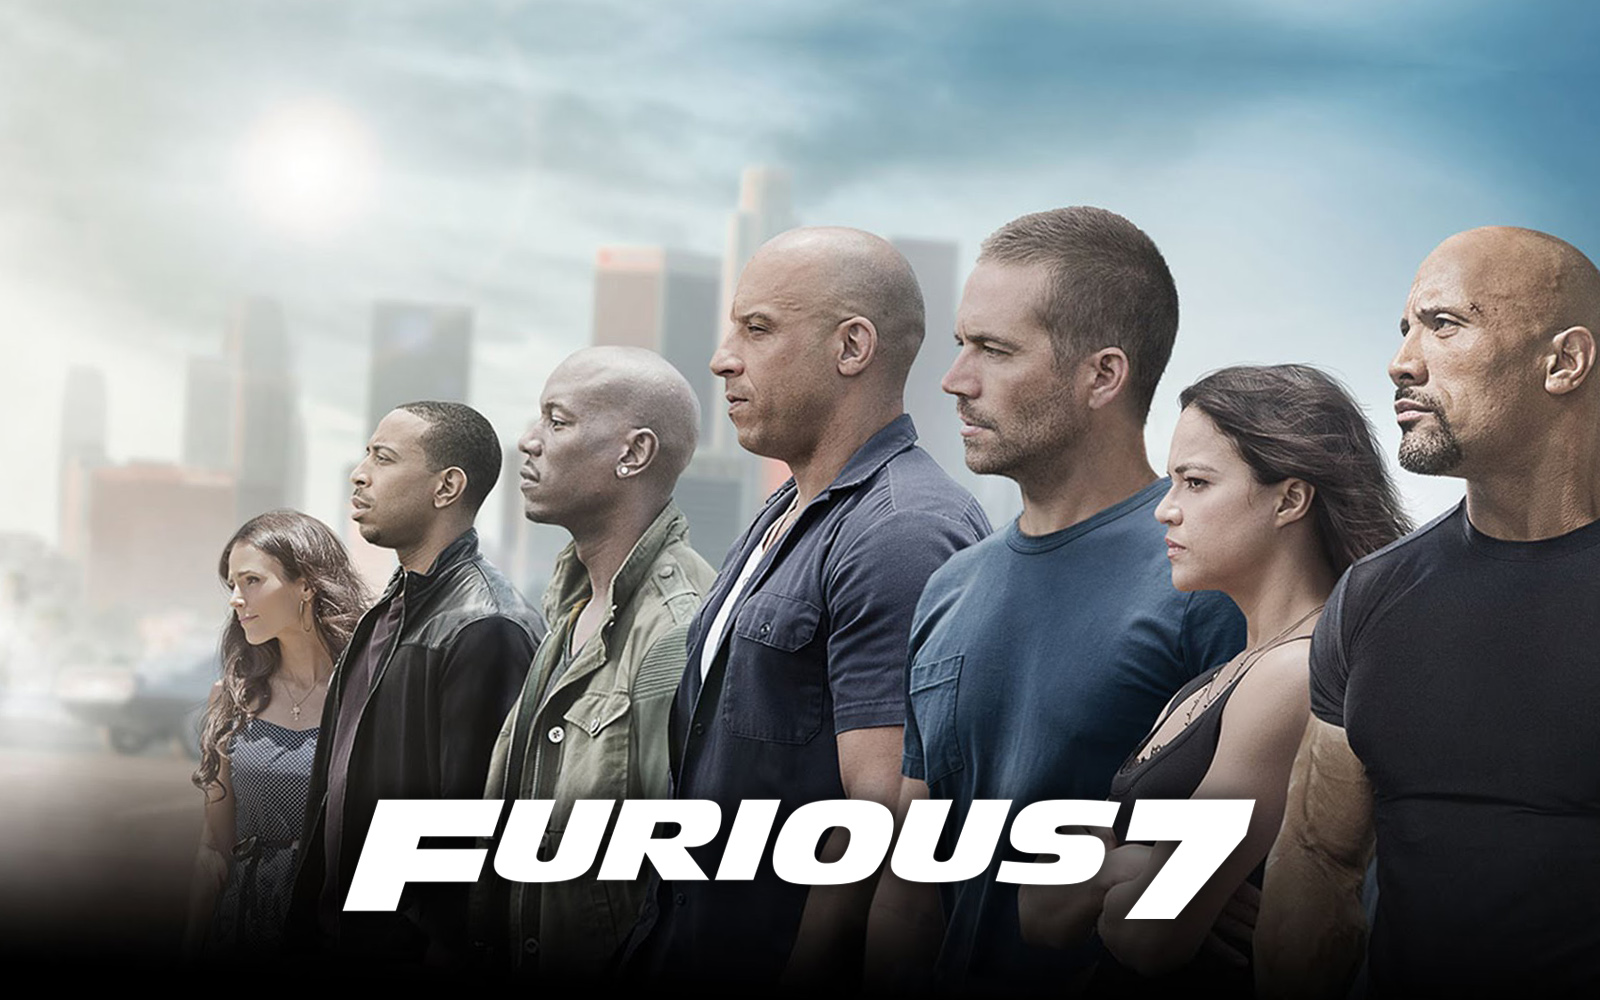 Marketing Fast and Furious 7 - Box Office Smash - Buzzazz Advertising & Marketing Agency